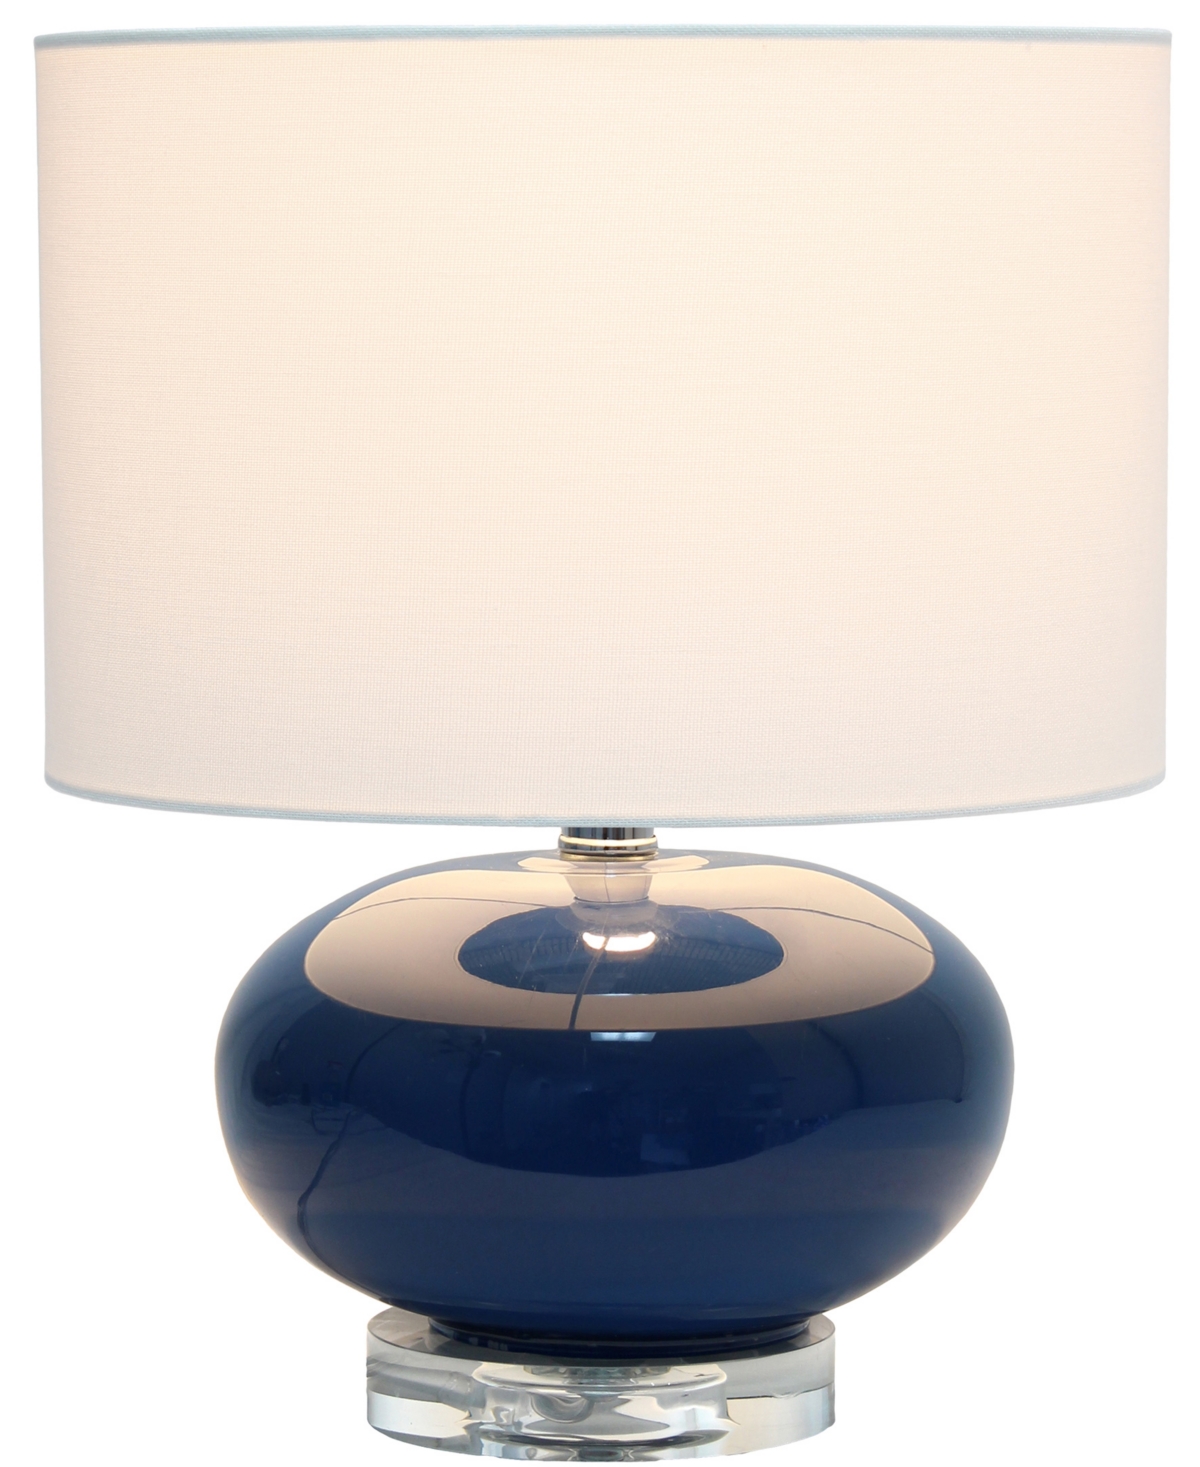 All The Rages 15.25" Modern Overload Glass Bedside Table Lamp With White Fabric Shade In Blue